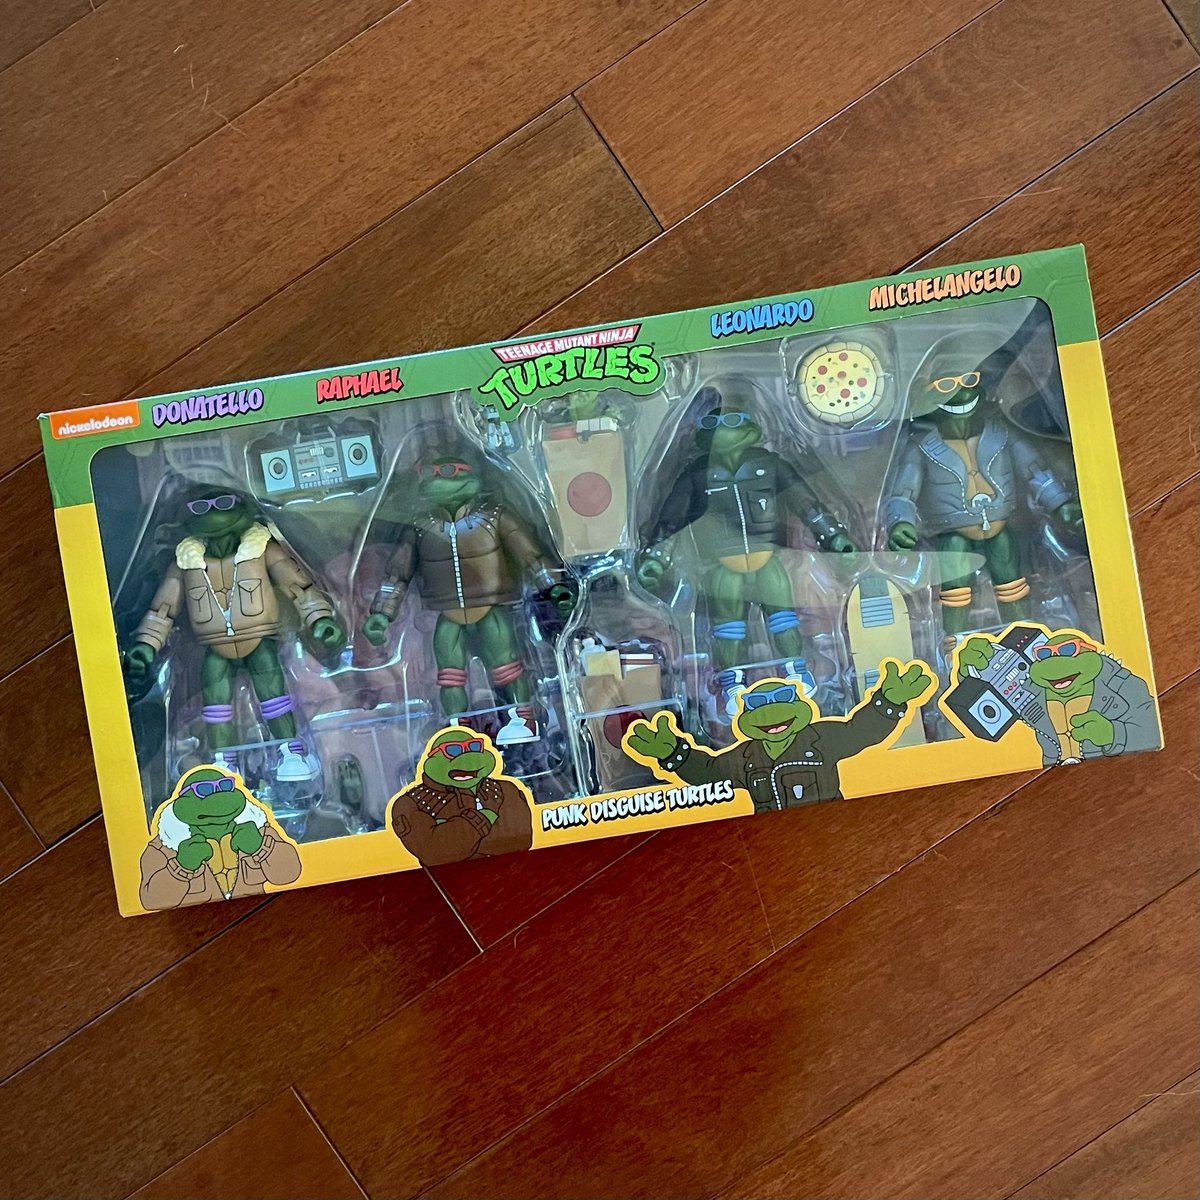 I finally found this amazing set in the wild. I needed a second so I can paint the Raph jacket white. Gonna open now, so RIP to my finger tips. IYKYK

#TMNT #NECA #NECAToys #teenagemutantNinjaturtles